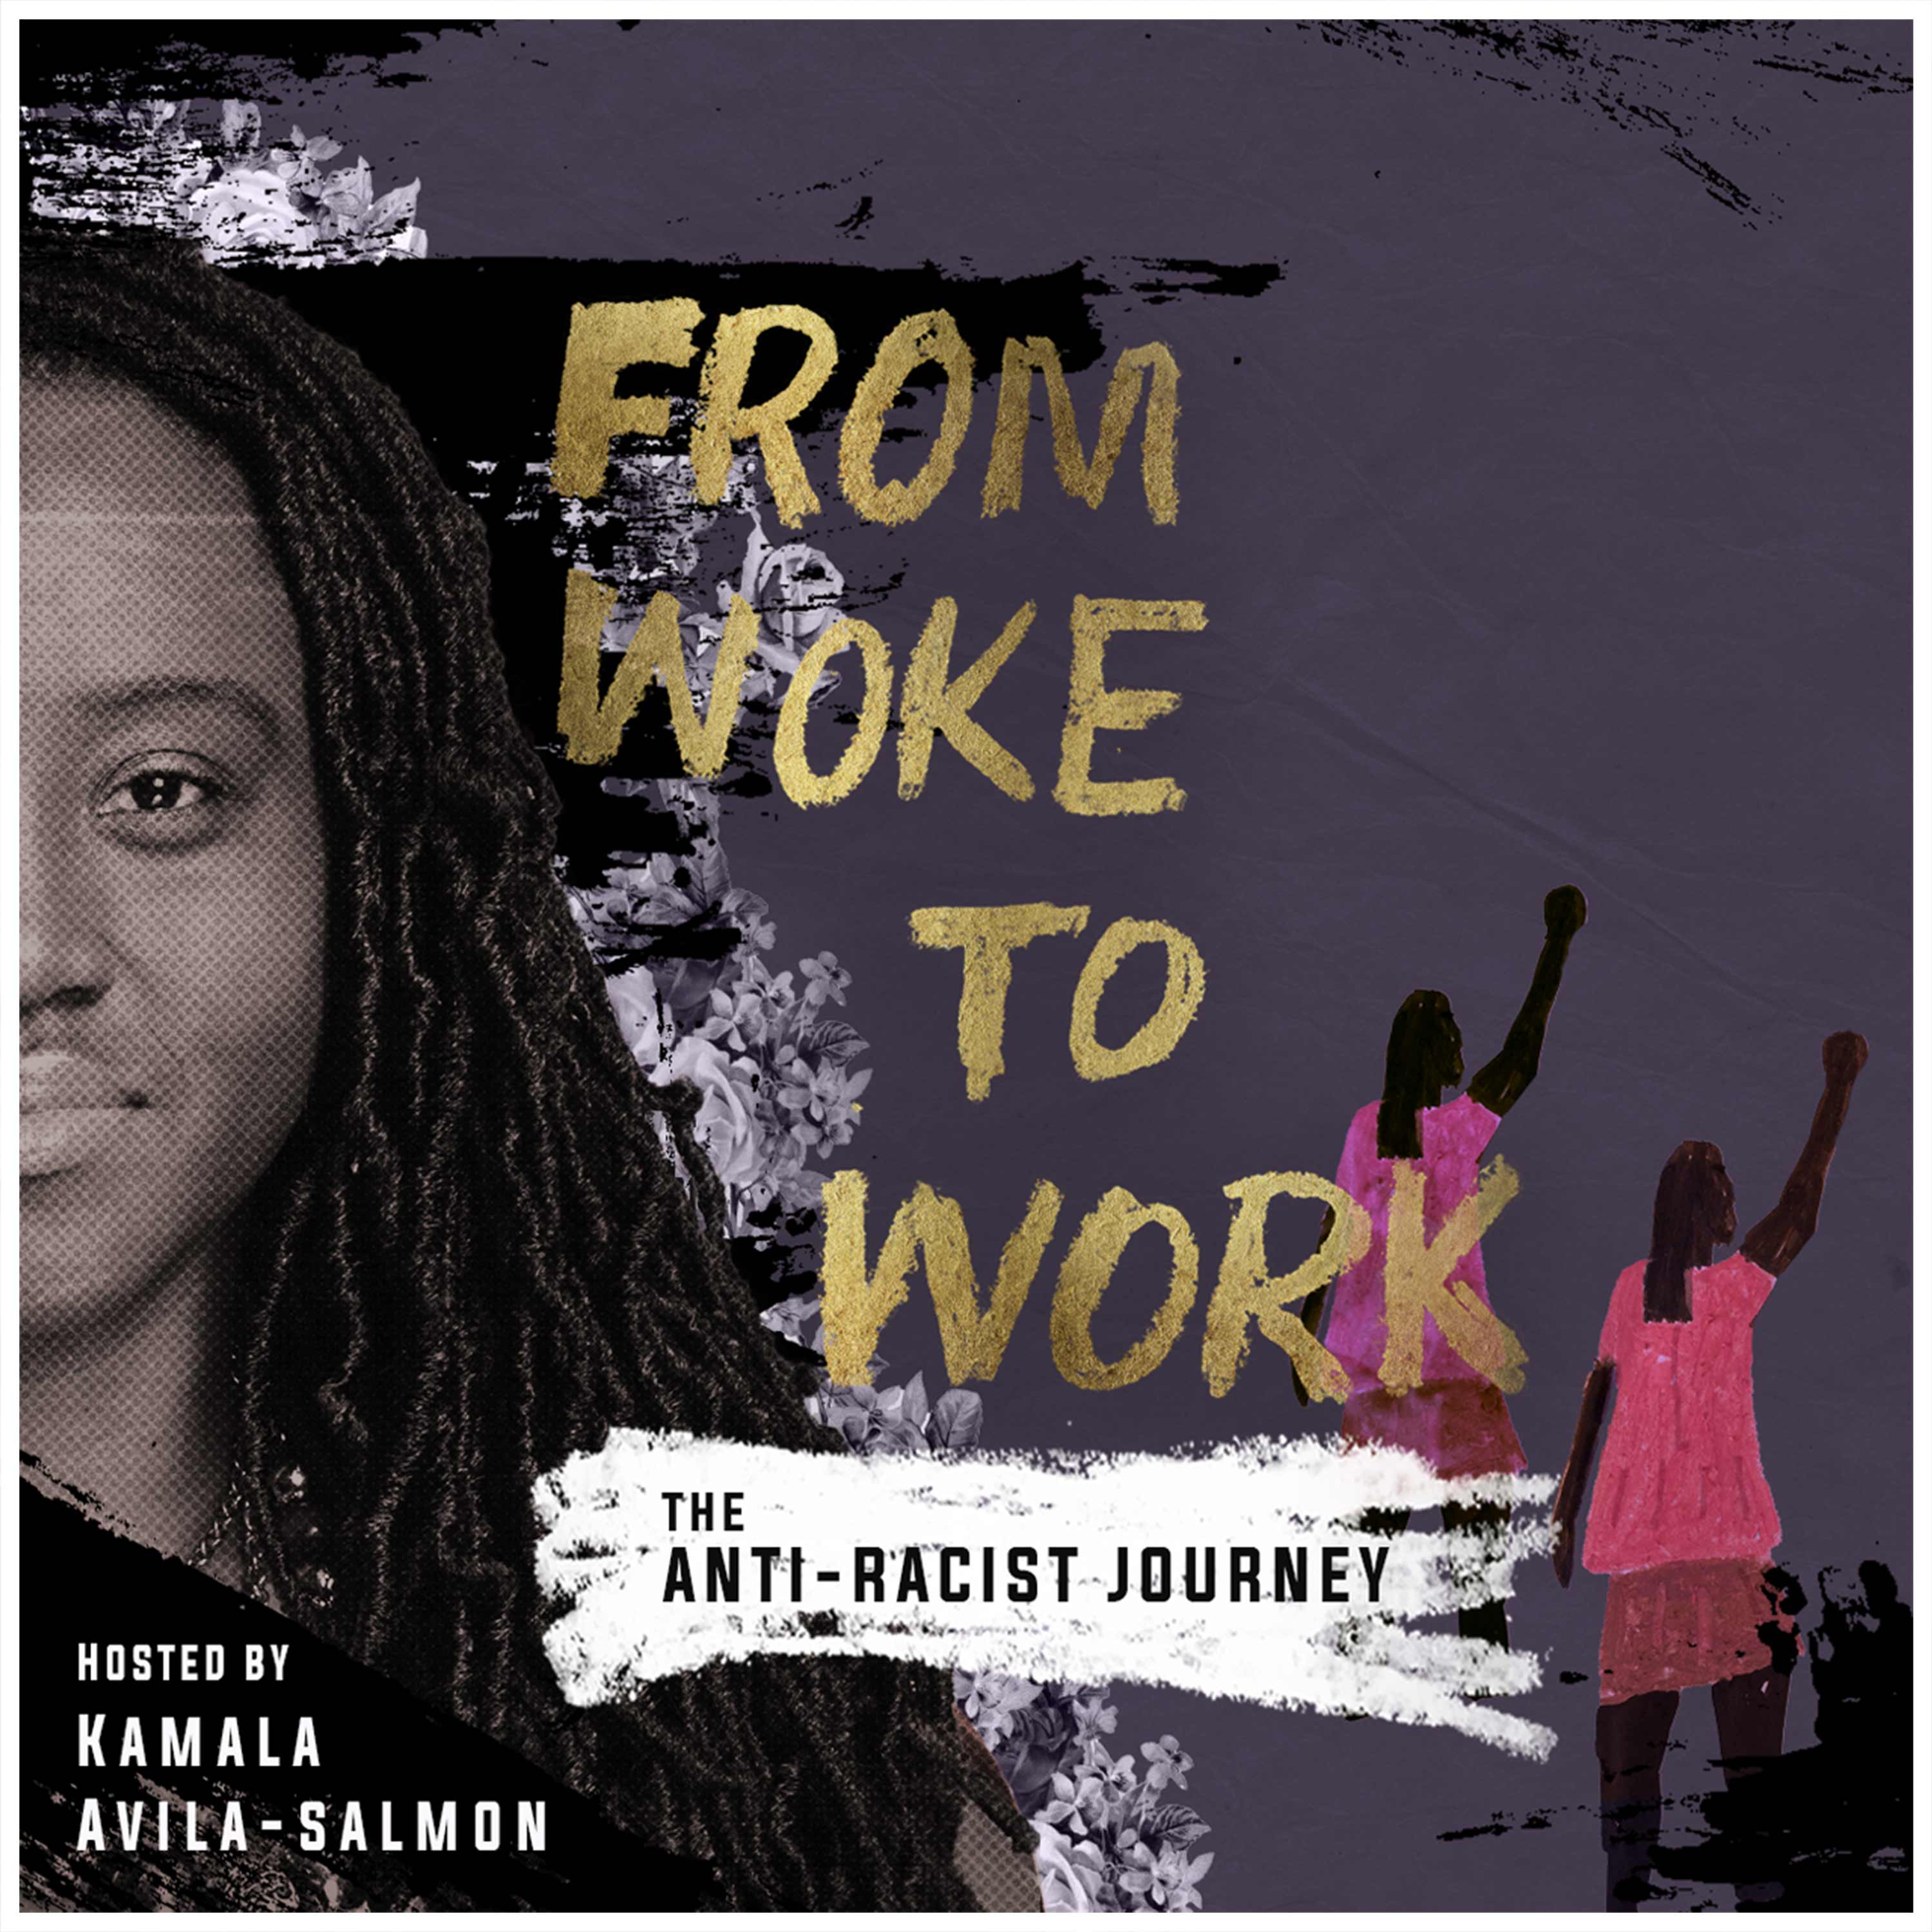 Artwork for From Woke to Work: The Anti-Racist Journey